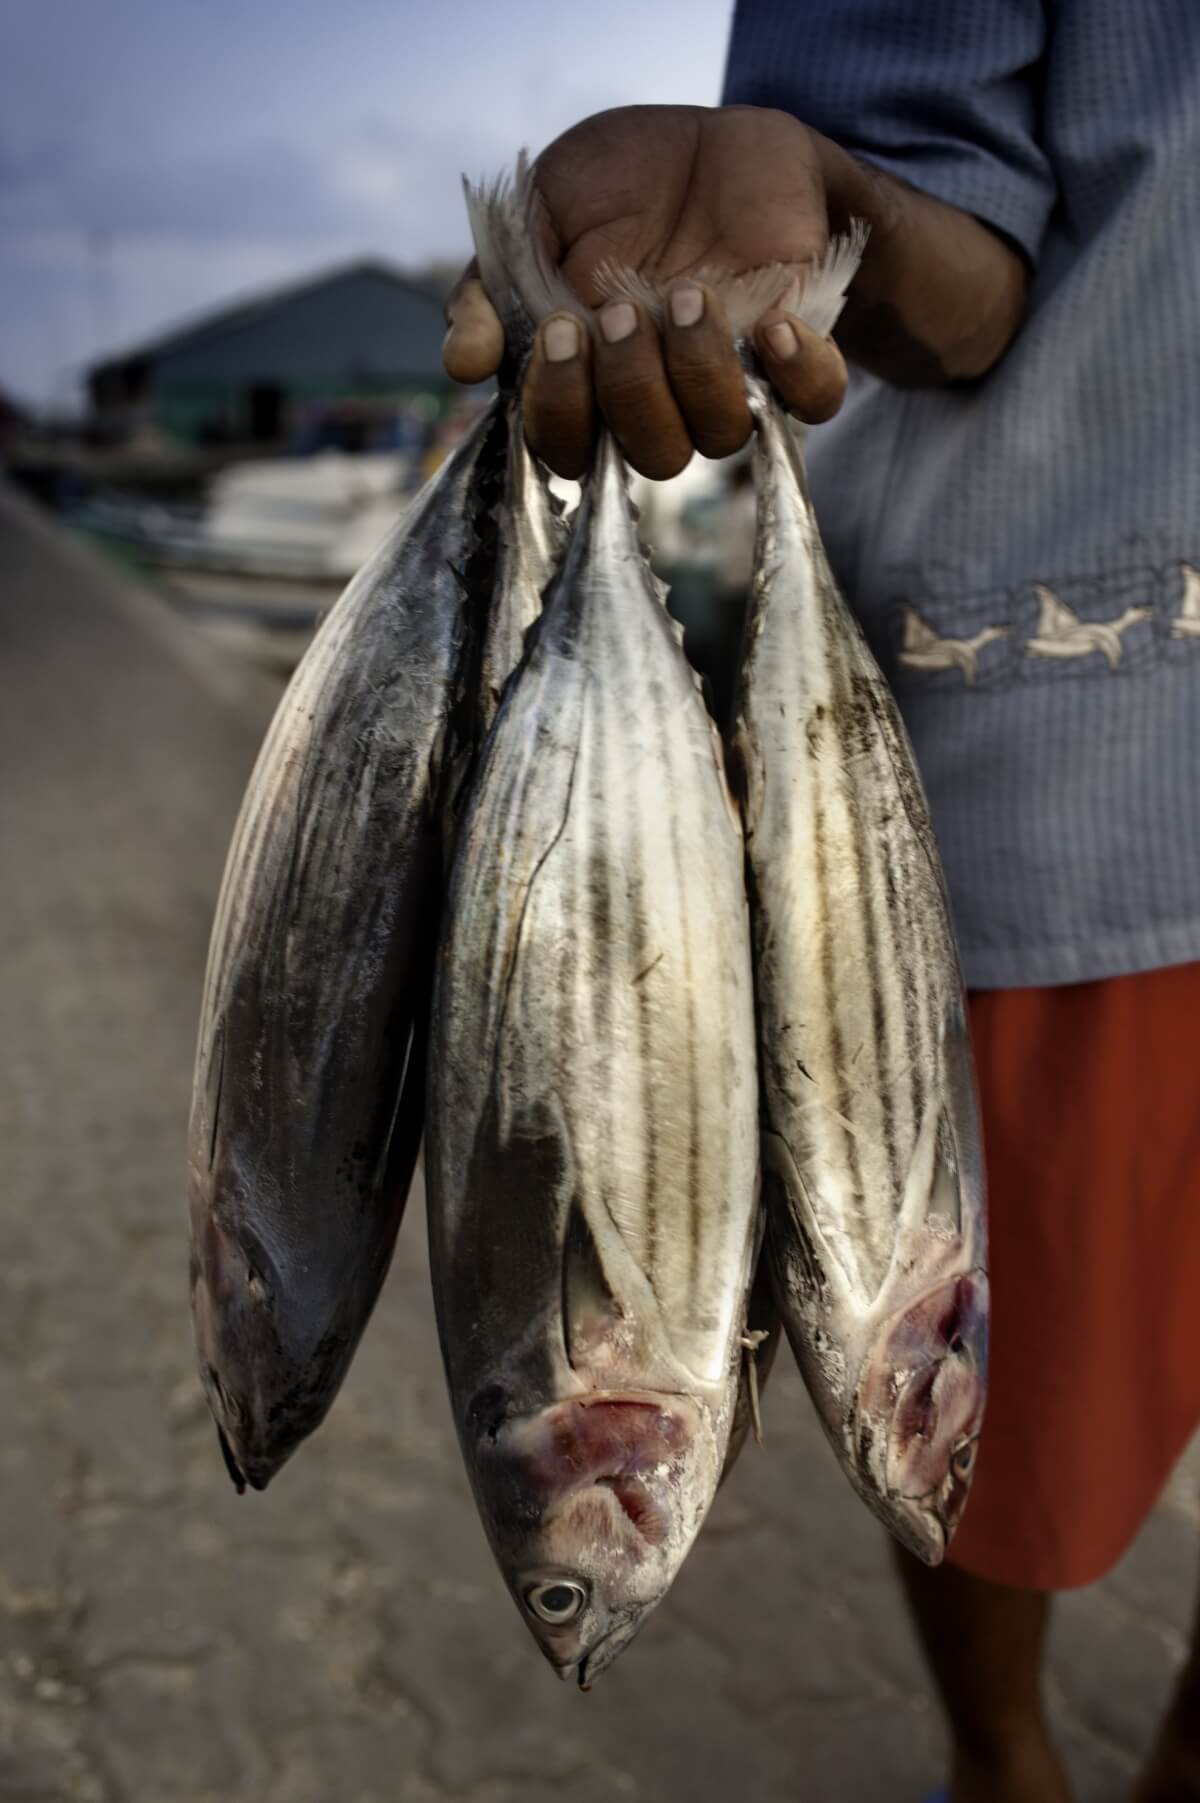 a-boy-holds-three-fishes-in-his-hand-near-local-market